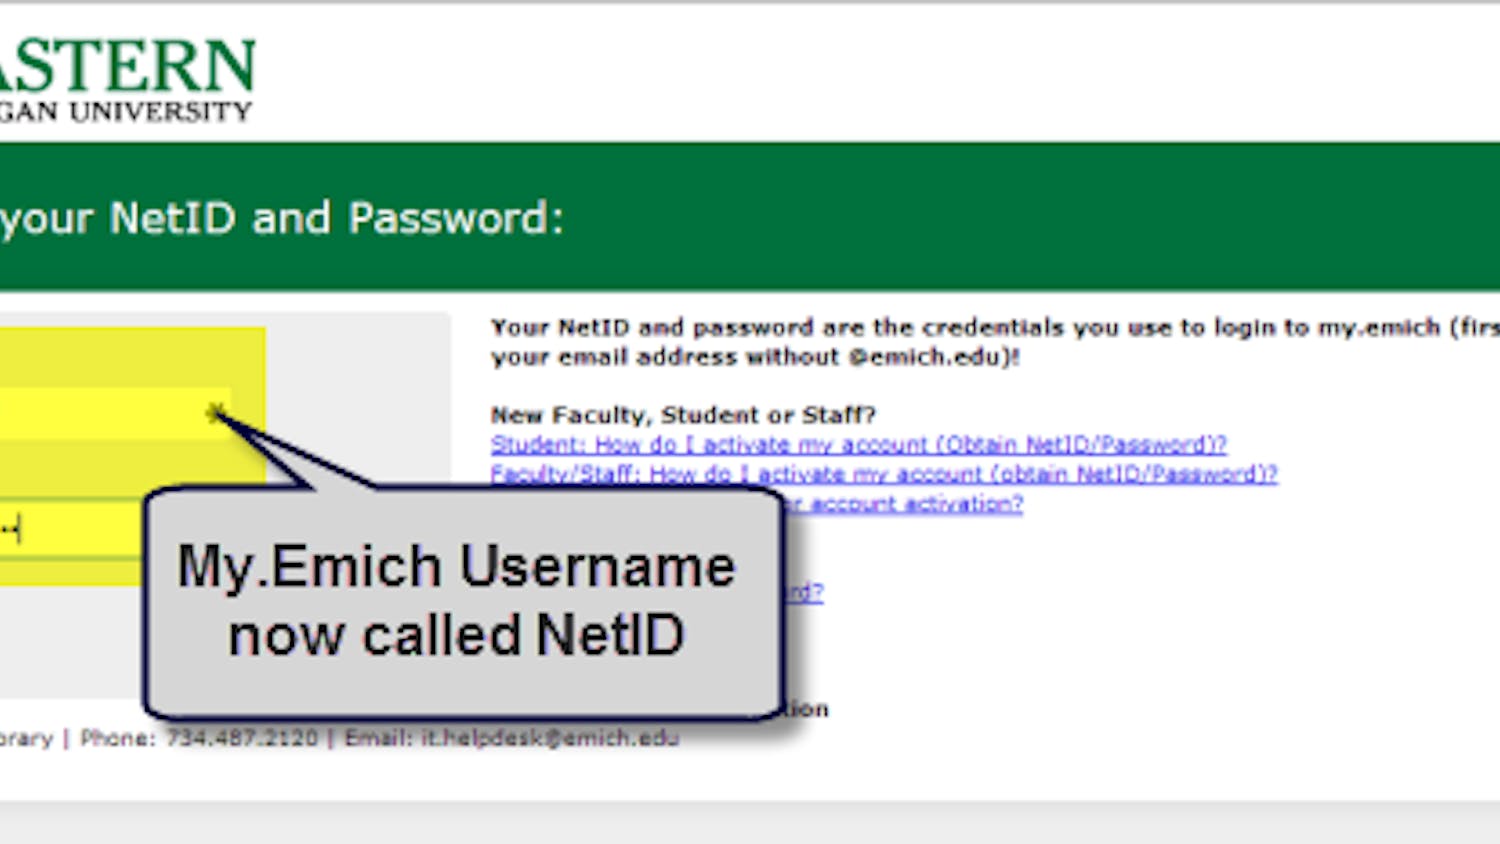 	My.Emich will be changing the Username section to NetID as part of a rebranding initiative by the university.